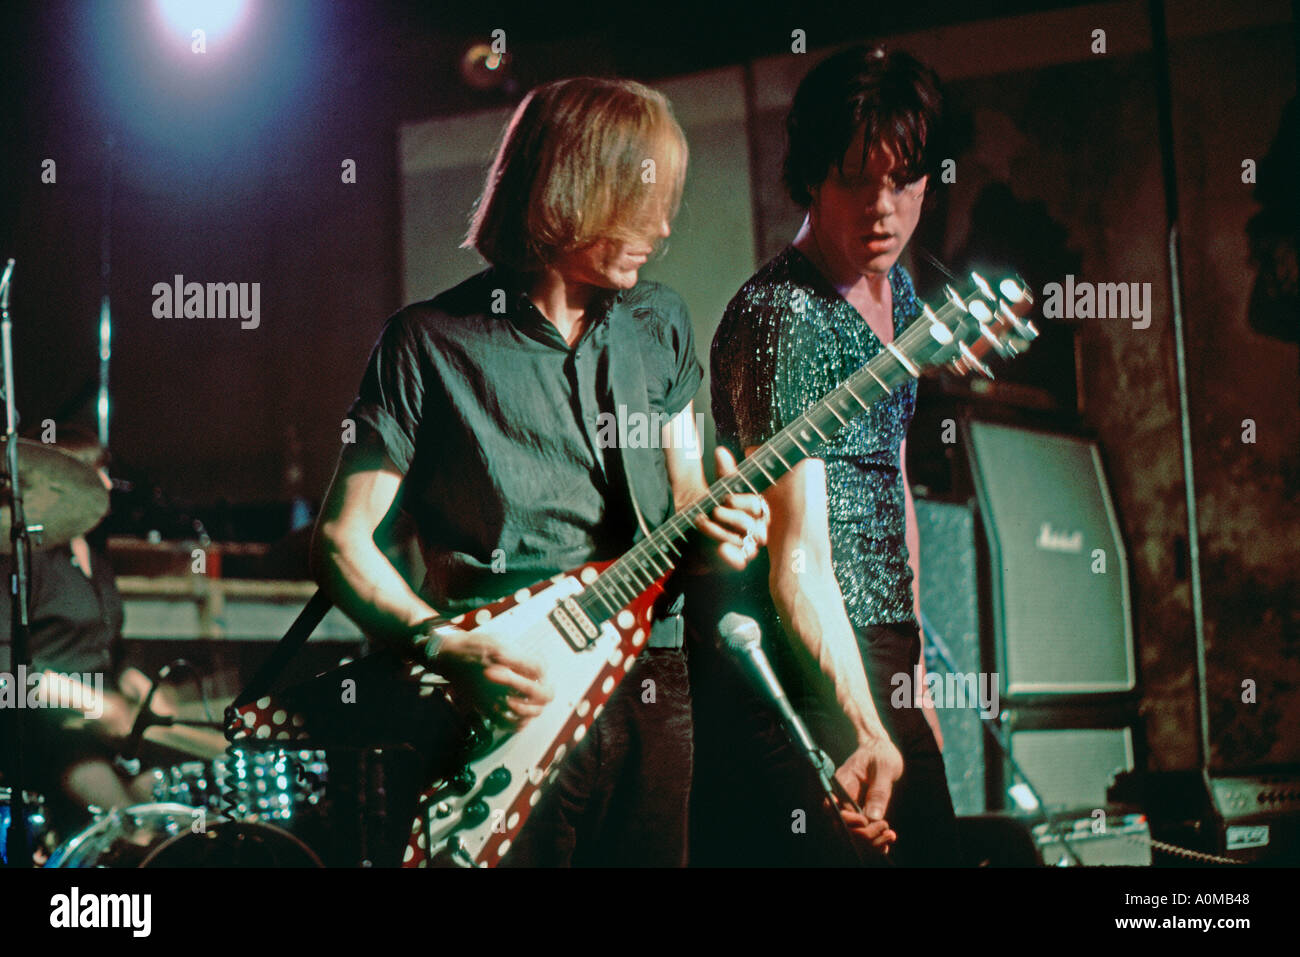 New York NY USA 'CBGBs » Two Nightclub Interior Scene with 'The Cramps' Androgenous Males Performing Punk Rock Guitarist making rock music 1977 punk Stock Photo